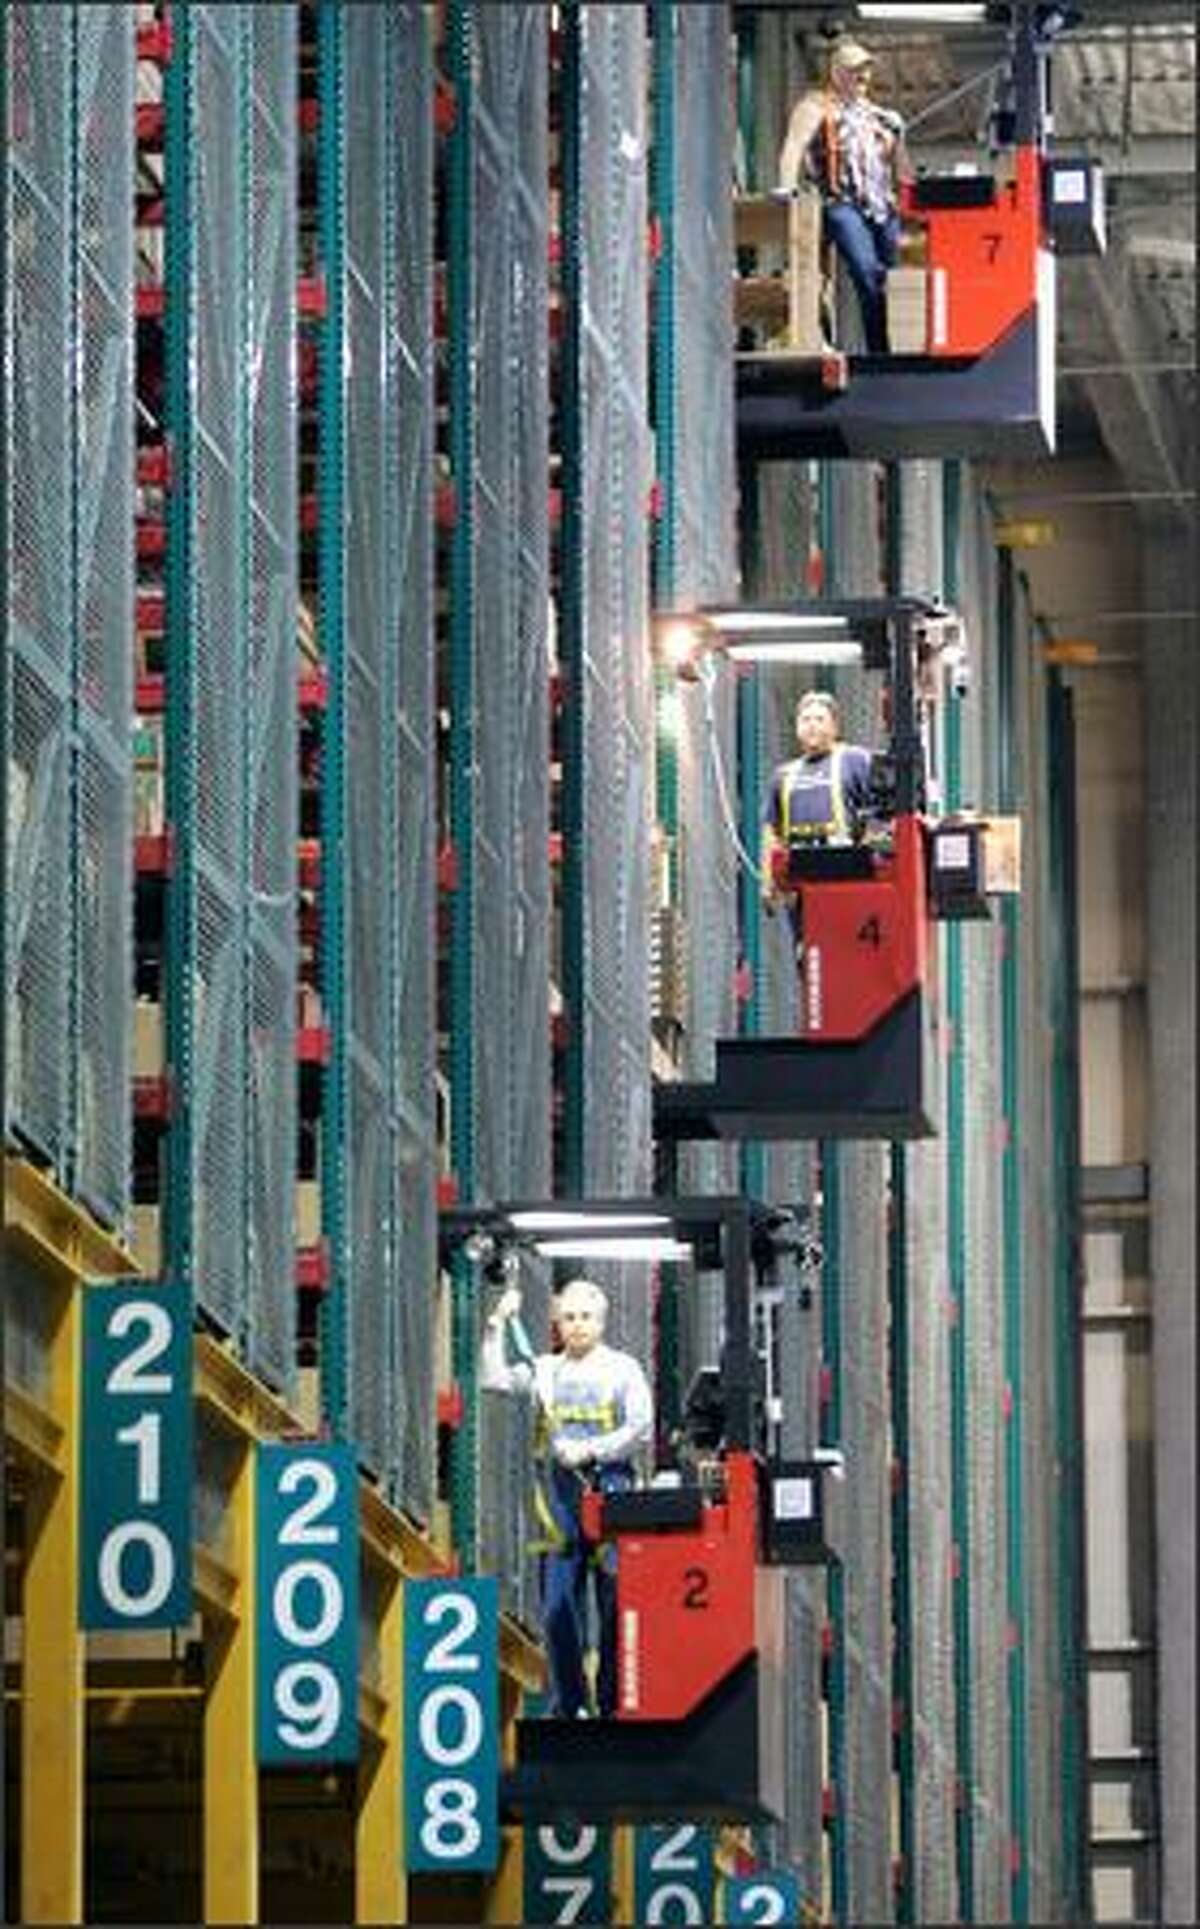 Boeing workers use these lifts to travel up to 60 feet to the top of huge storage bays at the Boeing Spares Distribution Center in SeaTac to fetch parts. The 24 high bay bins, each 60 feet high and 320 feet long, hold 5.9 million cubic feet of storage.